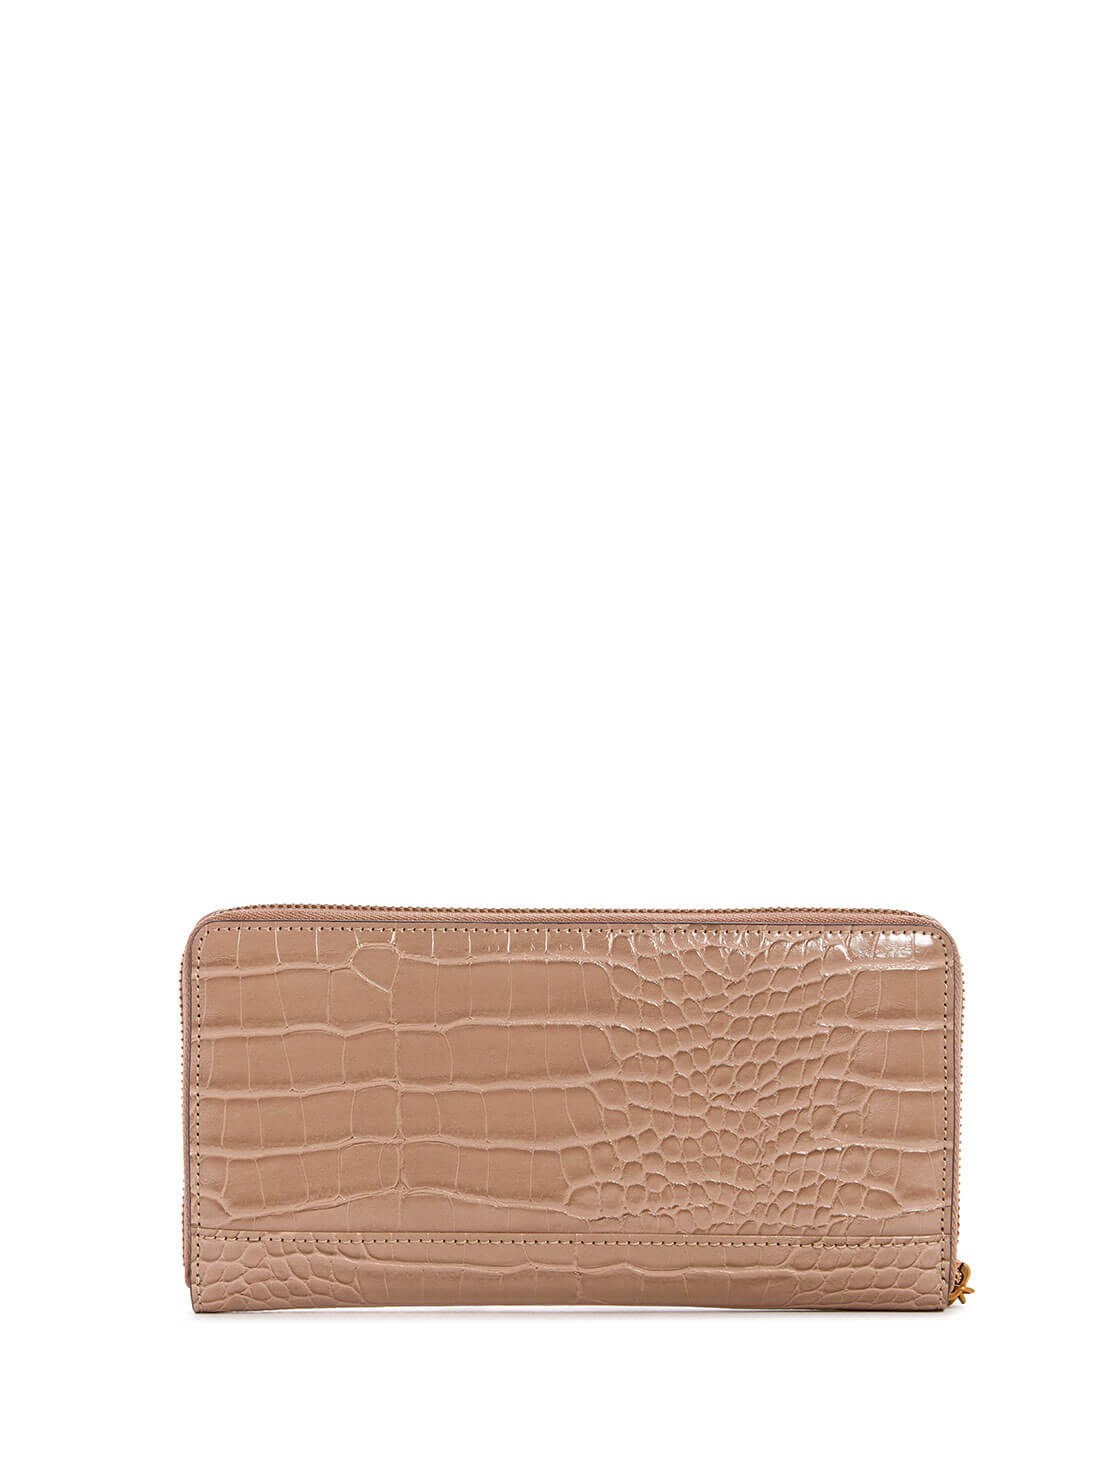 GUESS Womens  Taupe Croc Katey Cheque Organiser Wallet CB787063 Back View